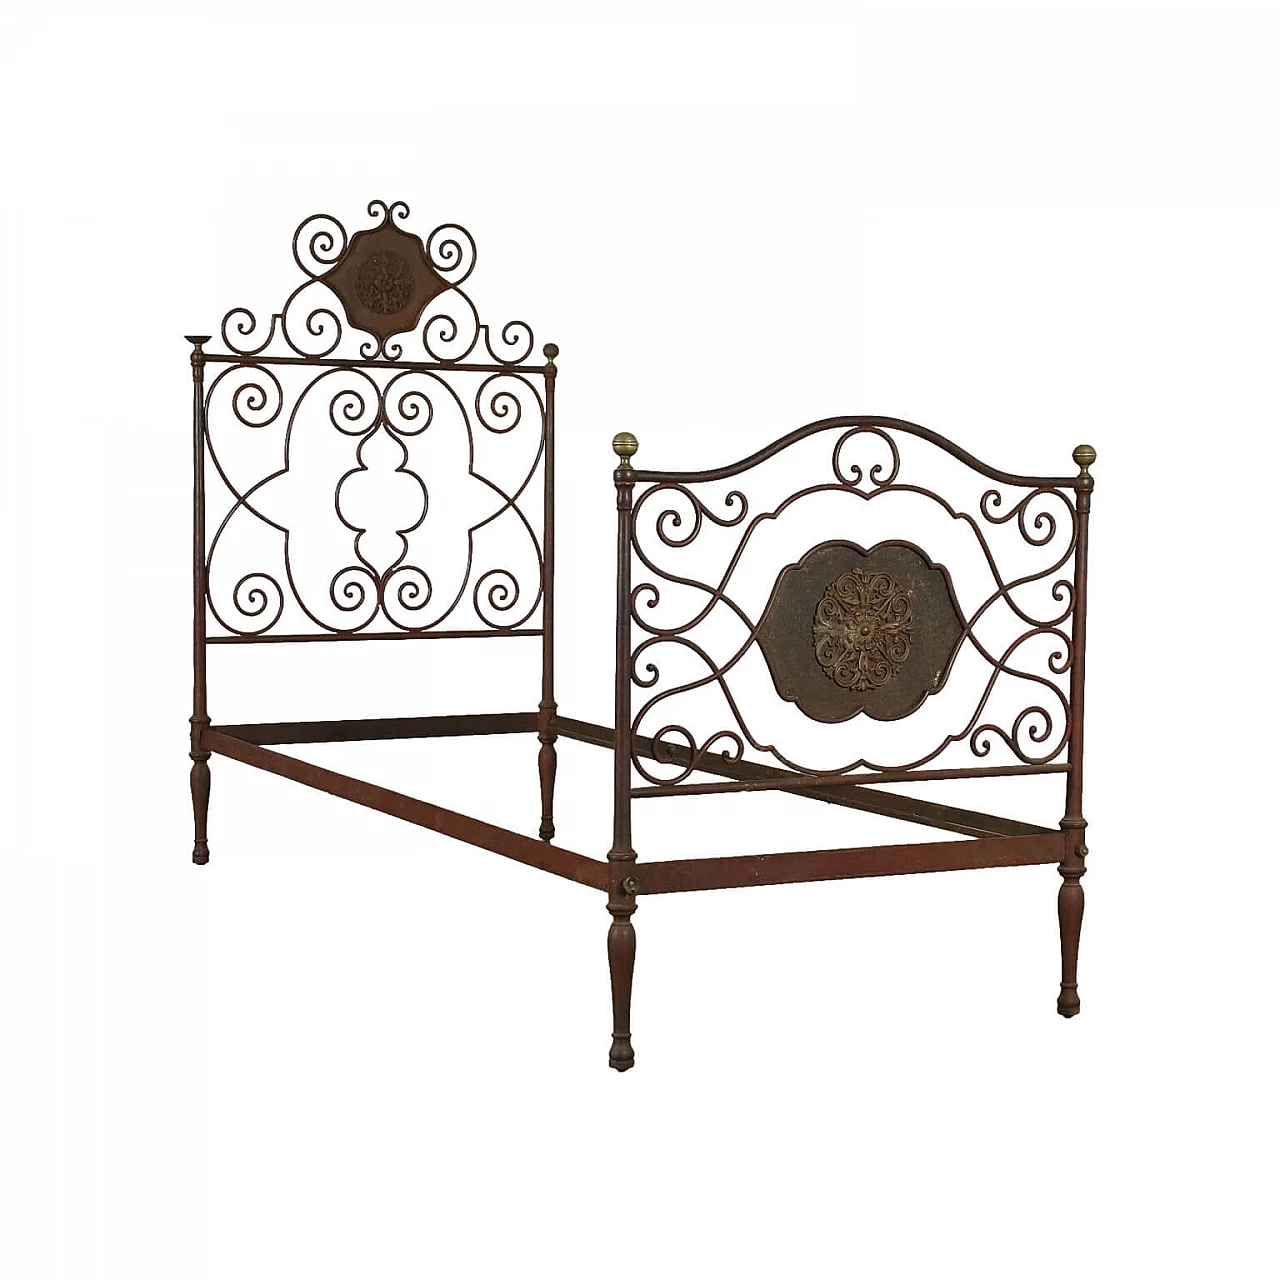 Single bed in wrought iron with rosettes, 19th century 1422845